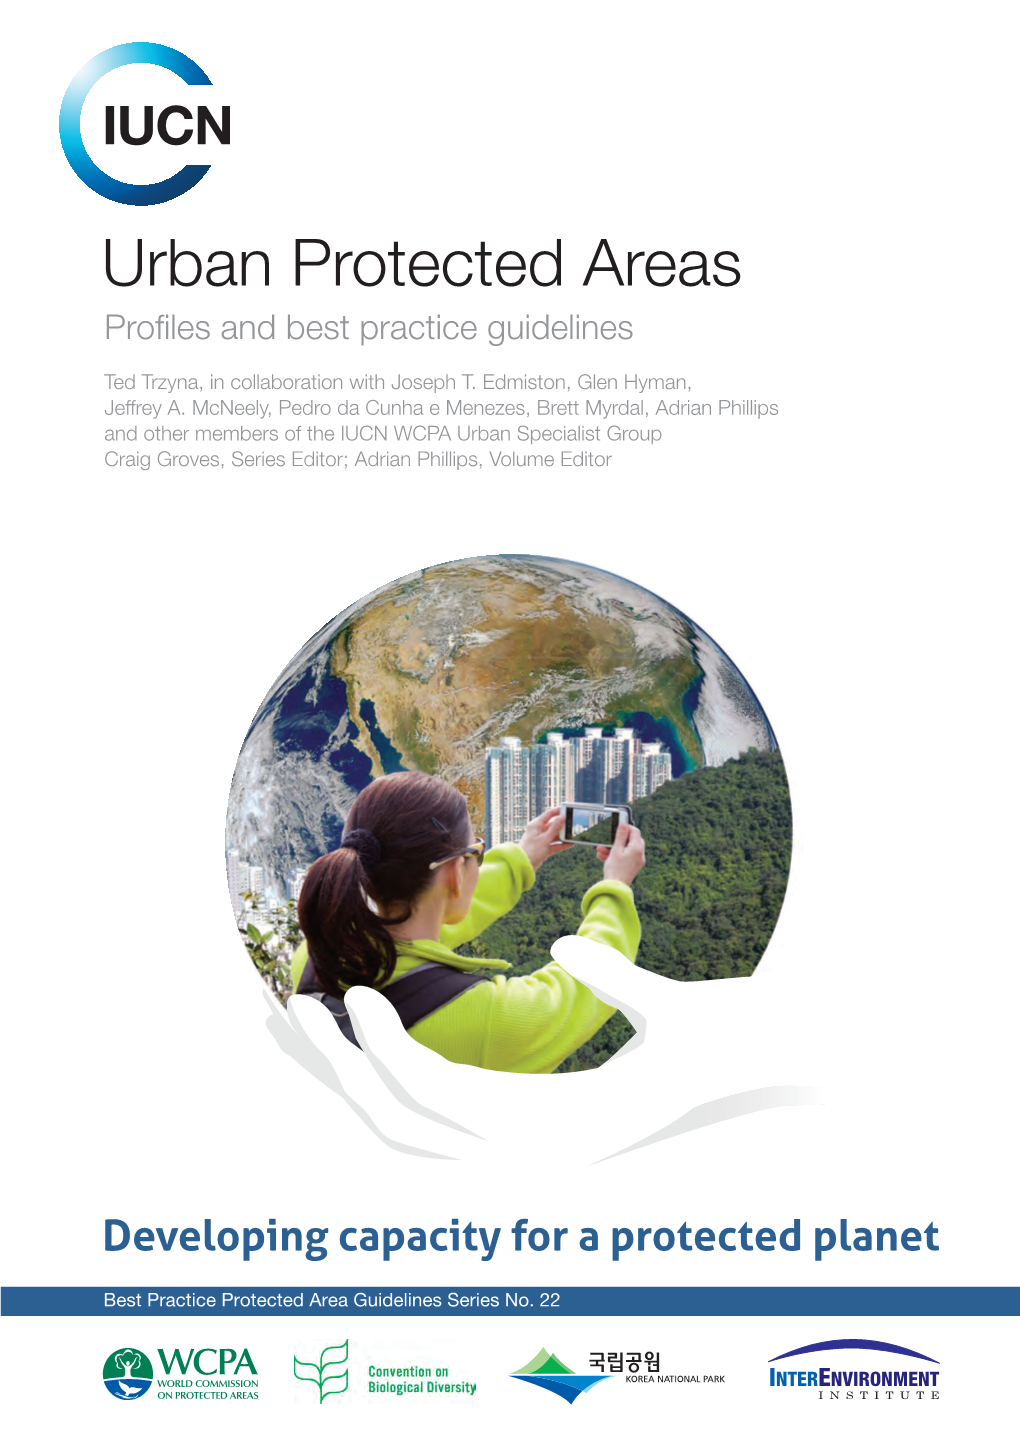 Urban Protected Areas: Profiles and Best Practice Guidelines. Best Practice Protected Area Guidelines Series No